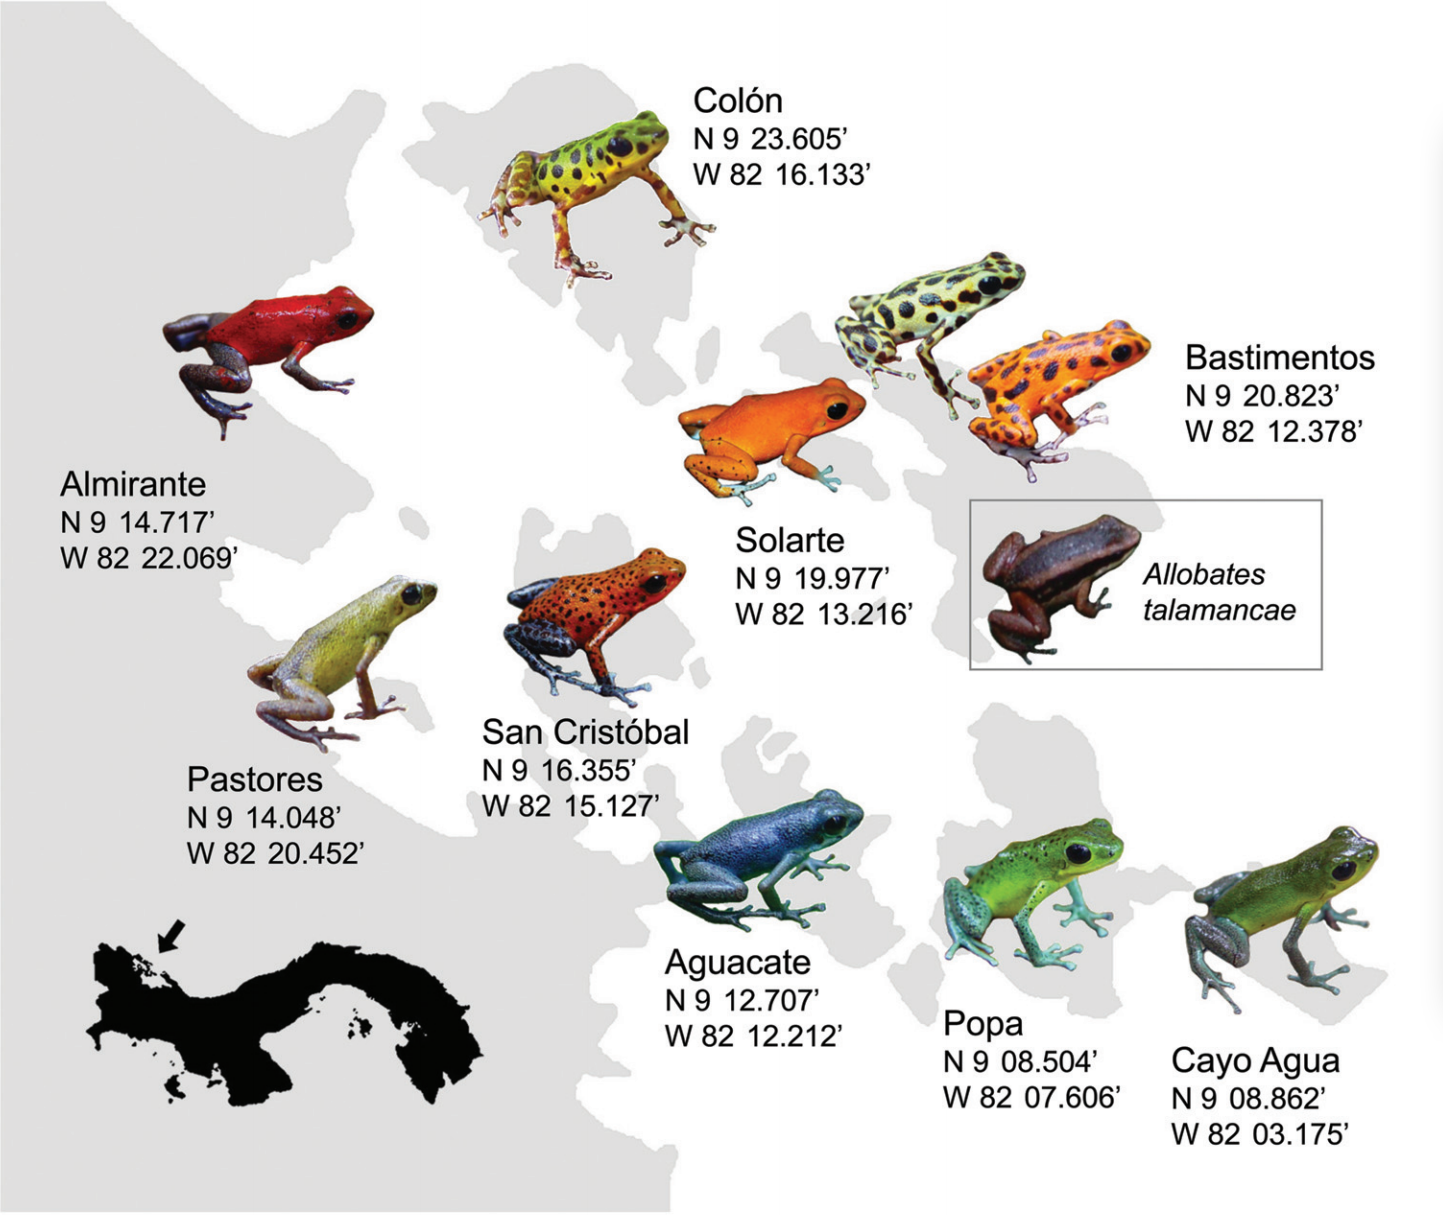 Intraspecific variation observed in the poison dart frog *Oophaga pumillio* across islands of the Bocas del Toro Archipelago Panama. Note that *Allobates talamancae* is a nontoxic frog species that coexists with the other species. Photo: Mann and Cummings (2012), [CC BY-SA 4.0](https://creativecommons.org/licenses/by-sa/4.0).